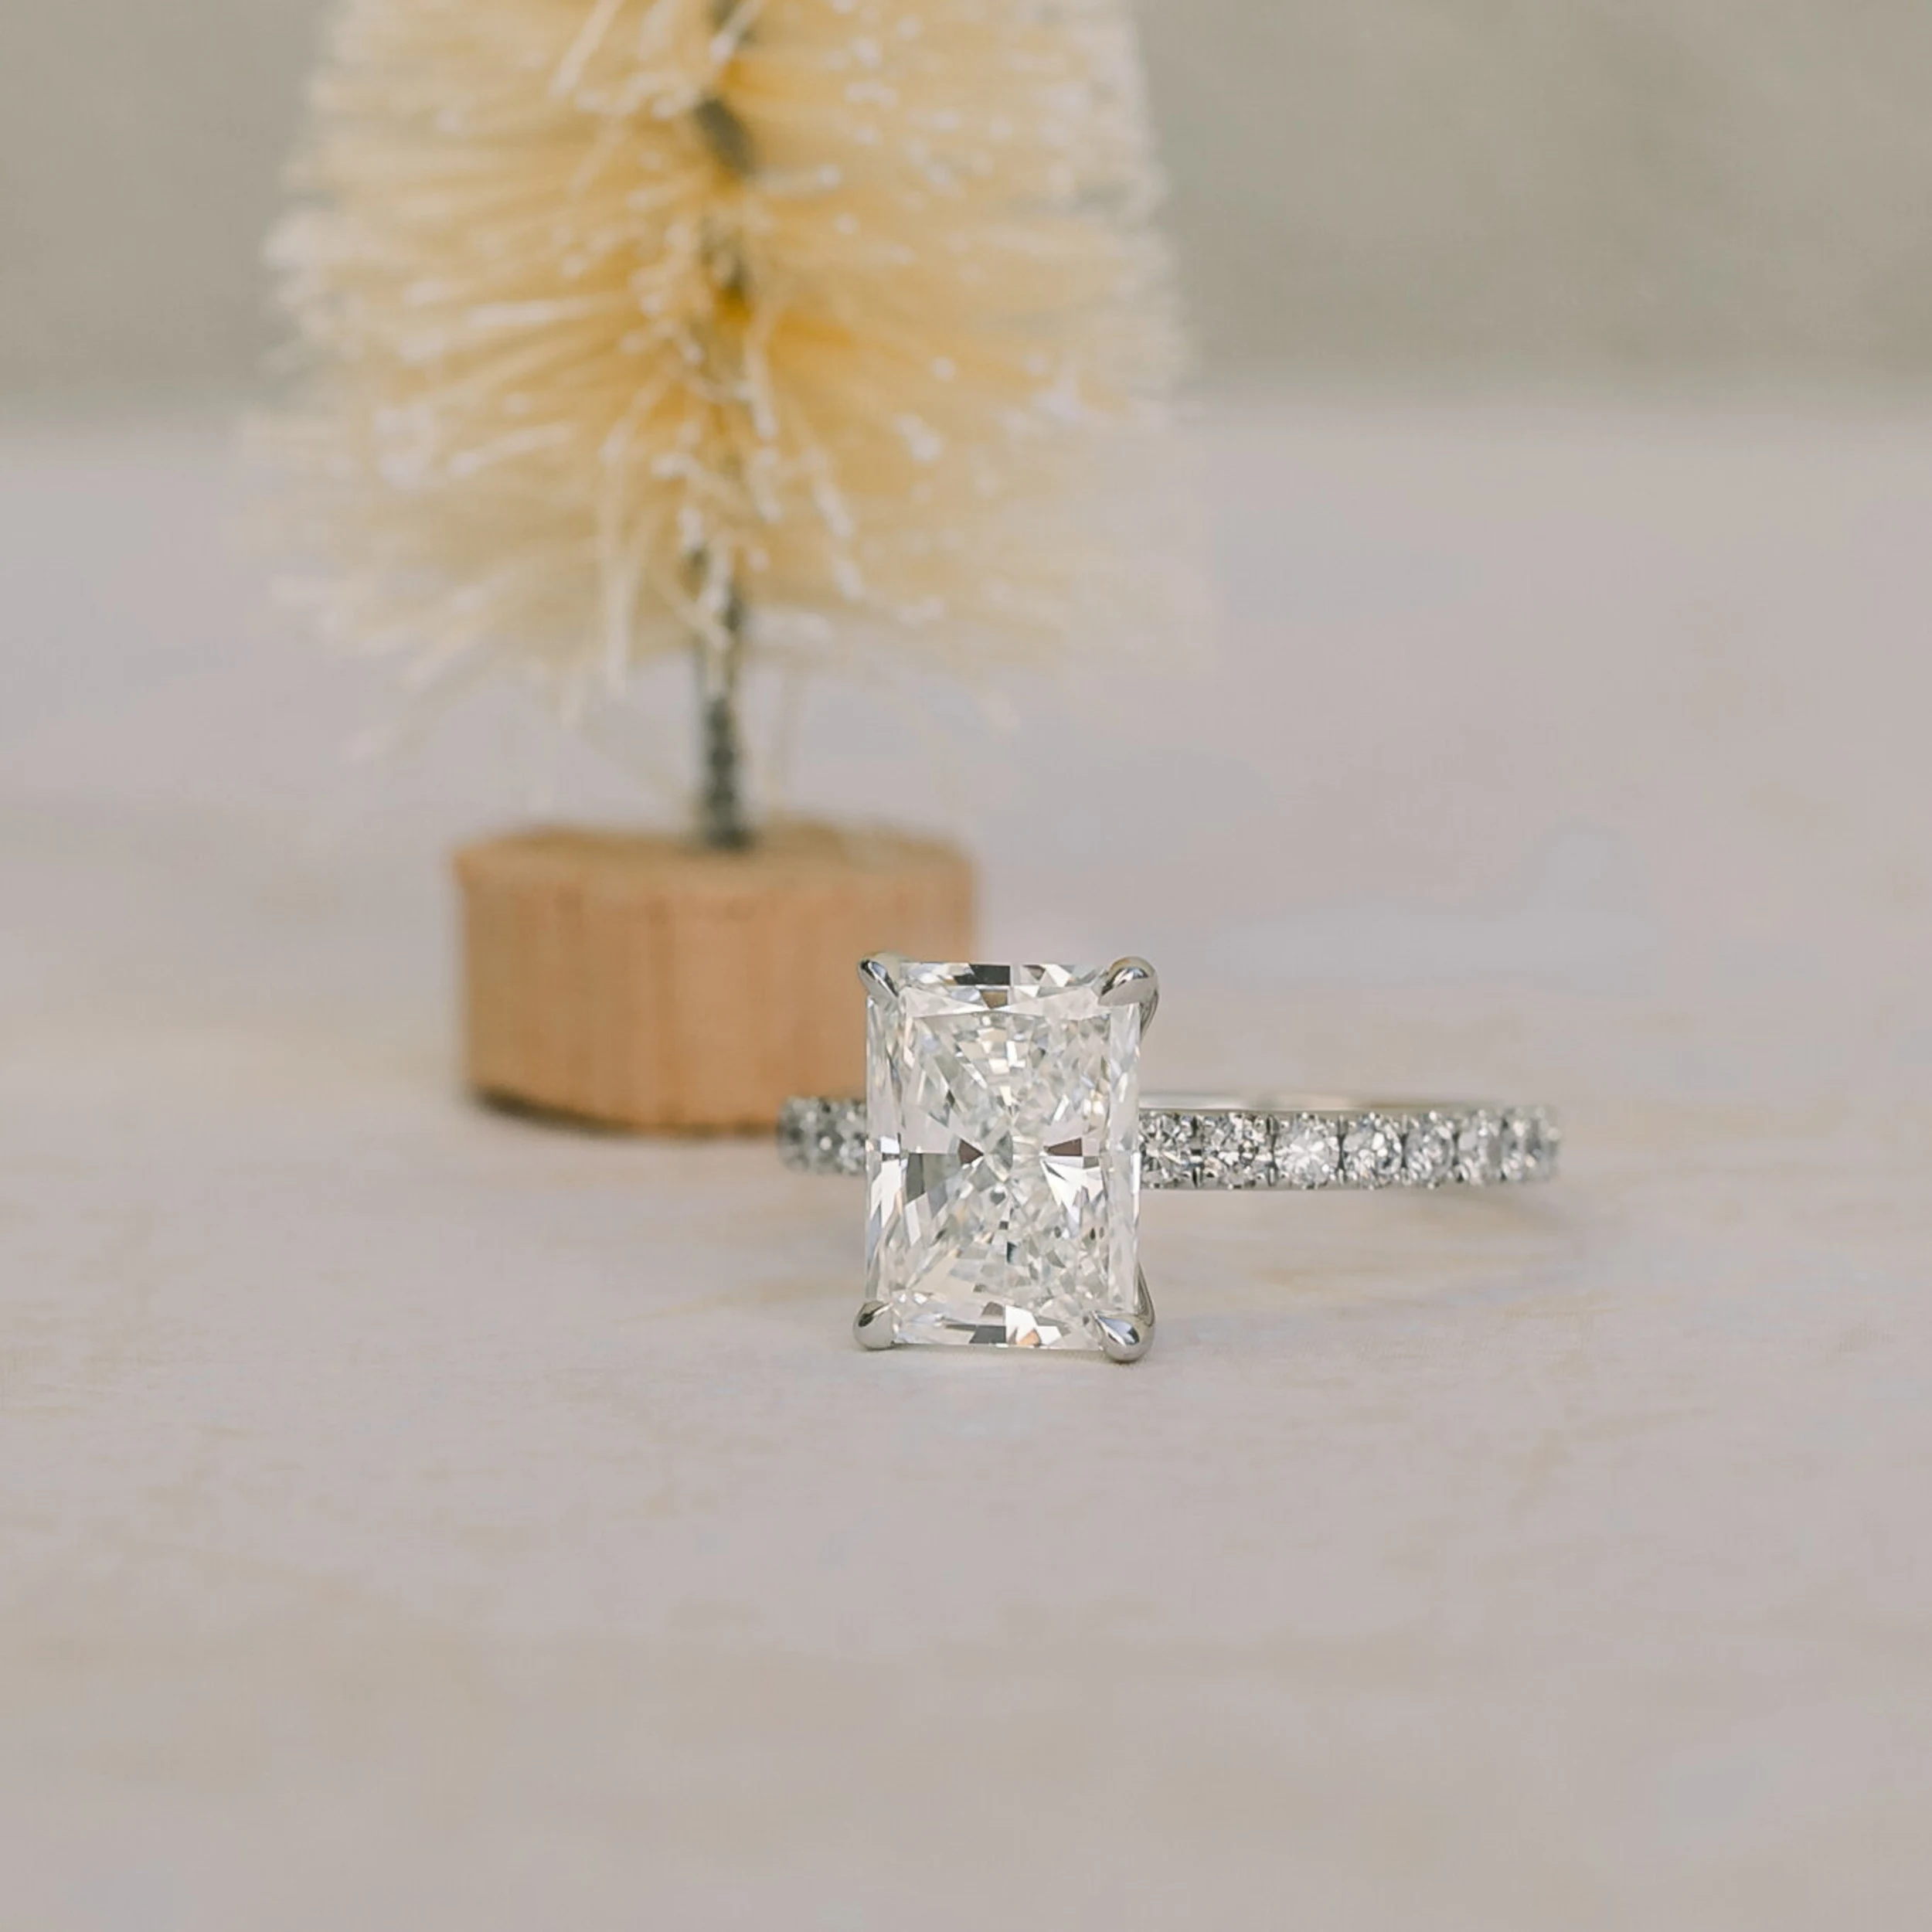 Platinum 3 Carat Radiant Classic Pavé Engagement Ring with Lab Diamonds Ada Diamonds Design AD-352 From Side View